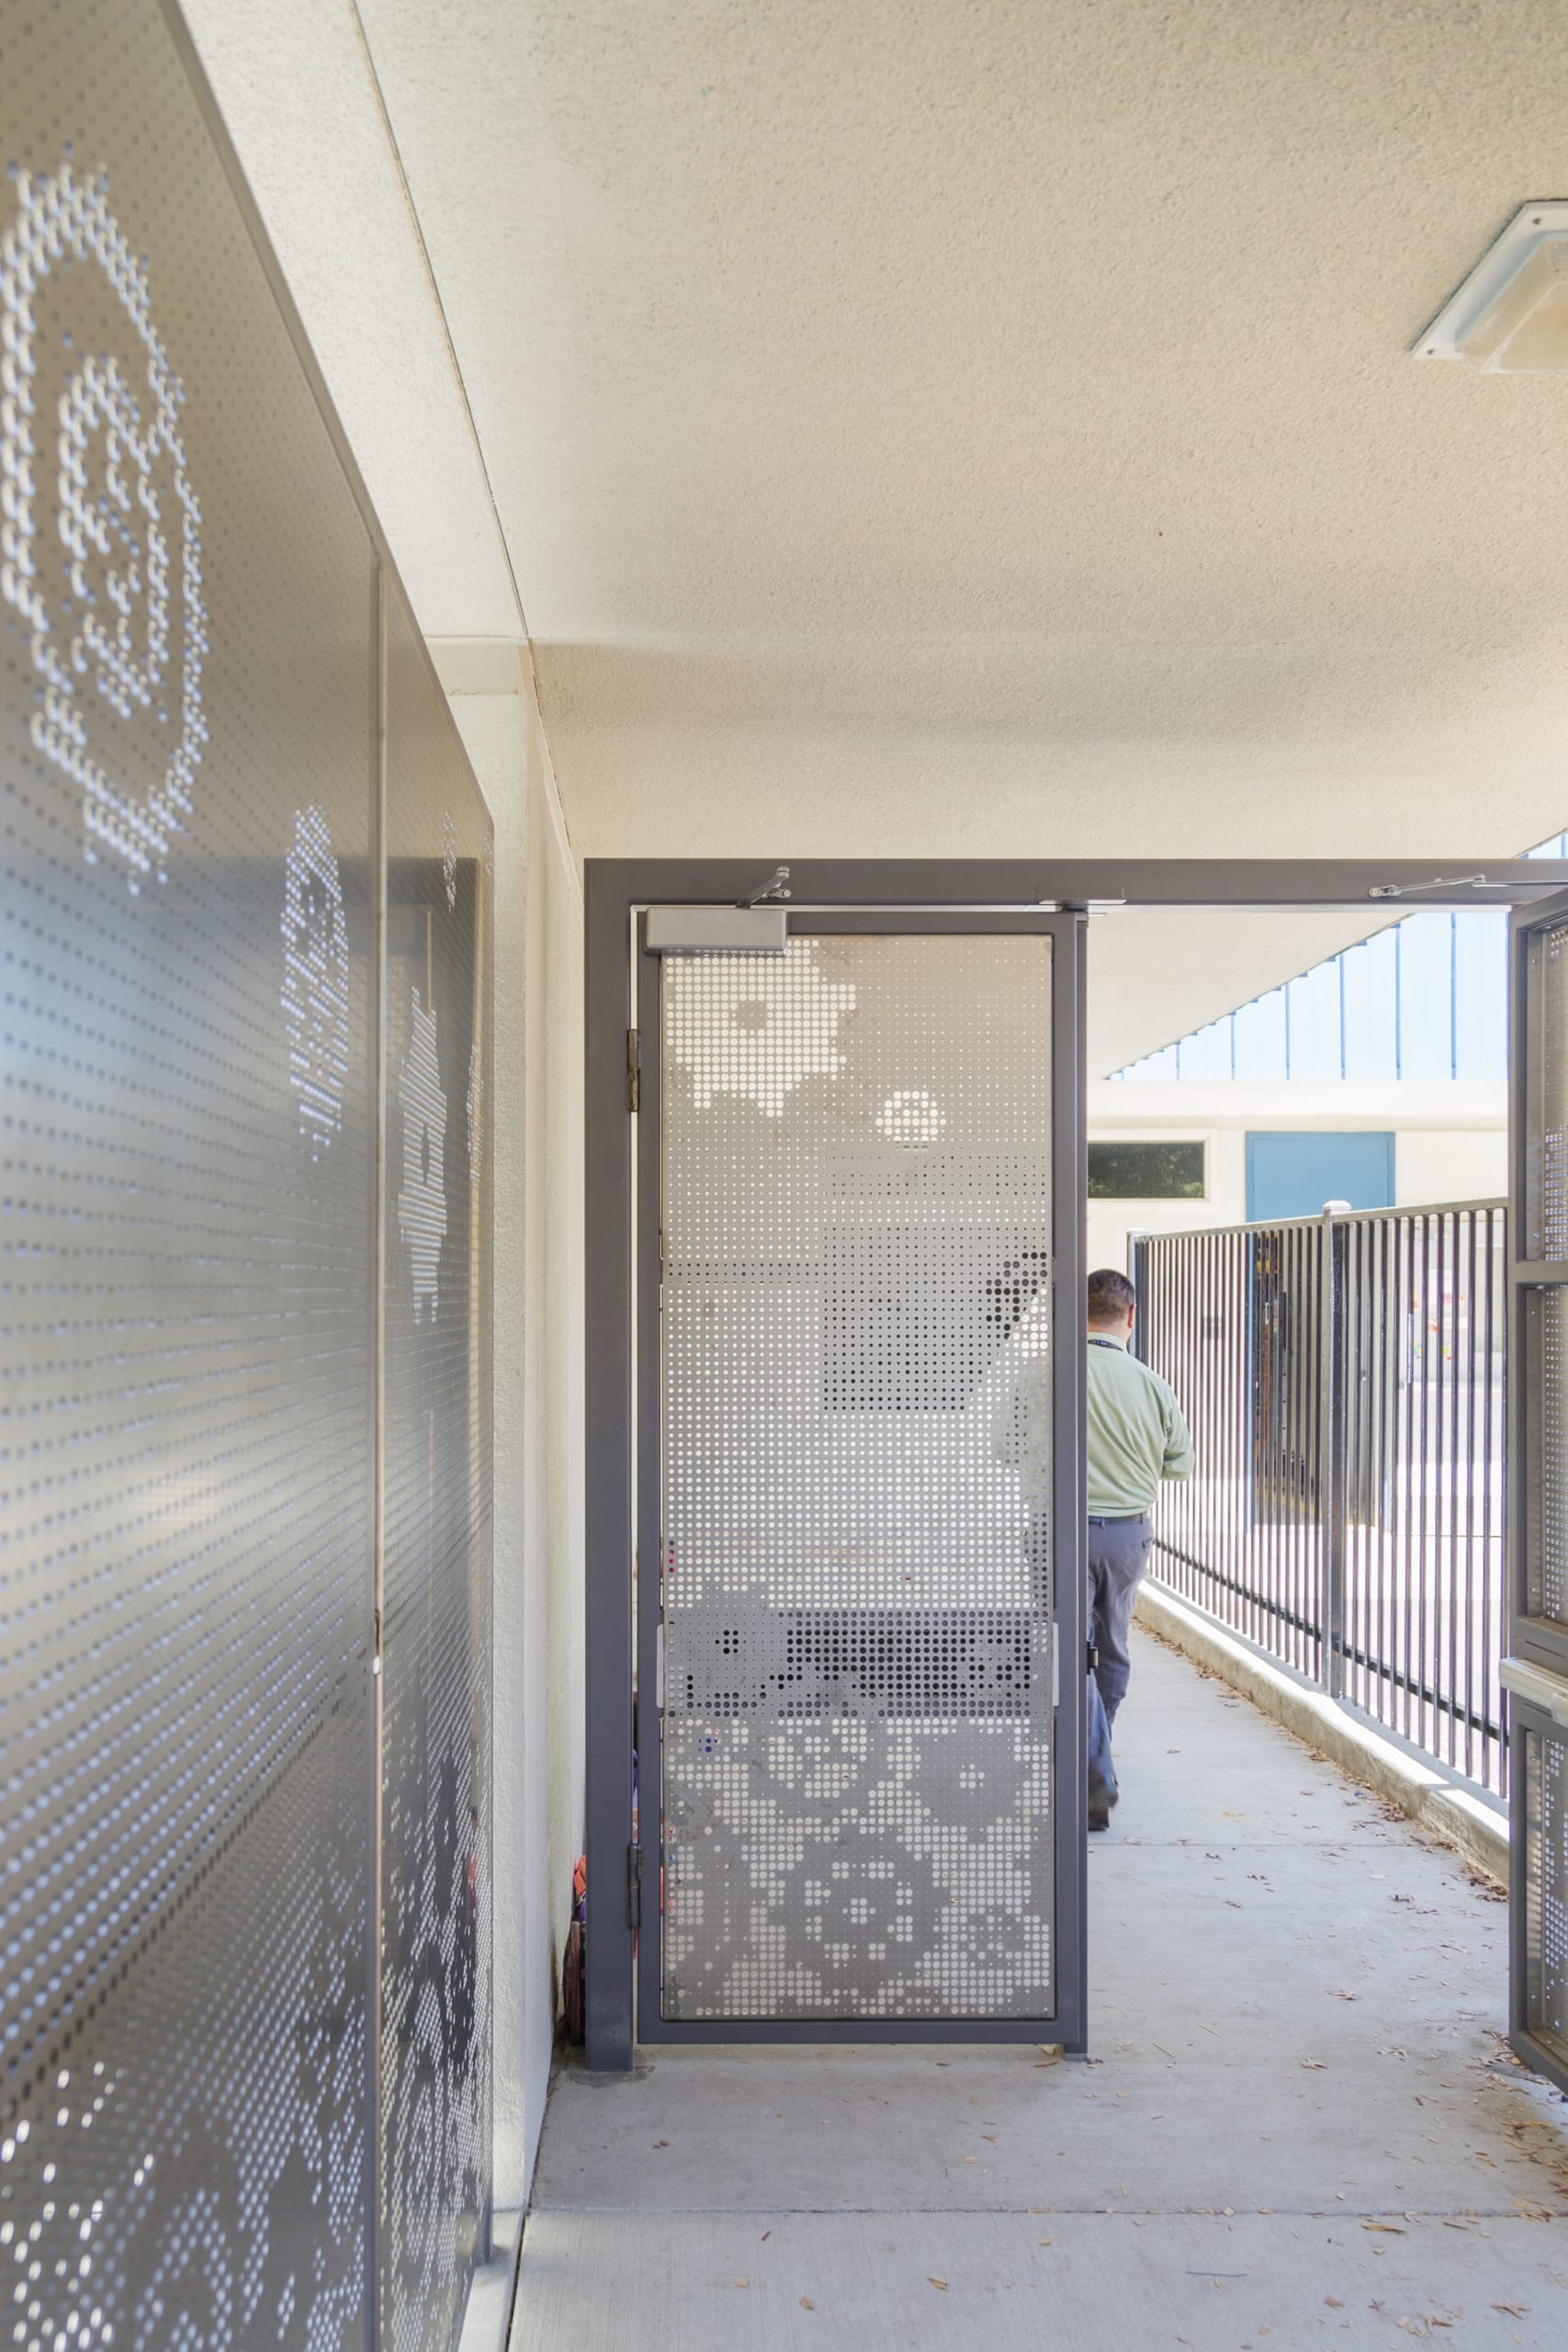 Perforated stainless steel doors at Washington Elementary.